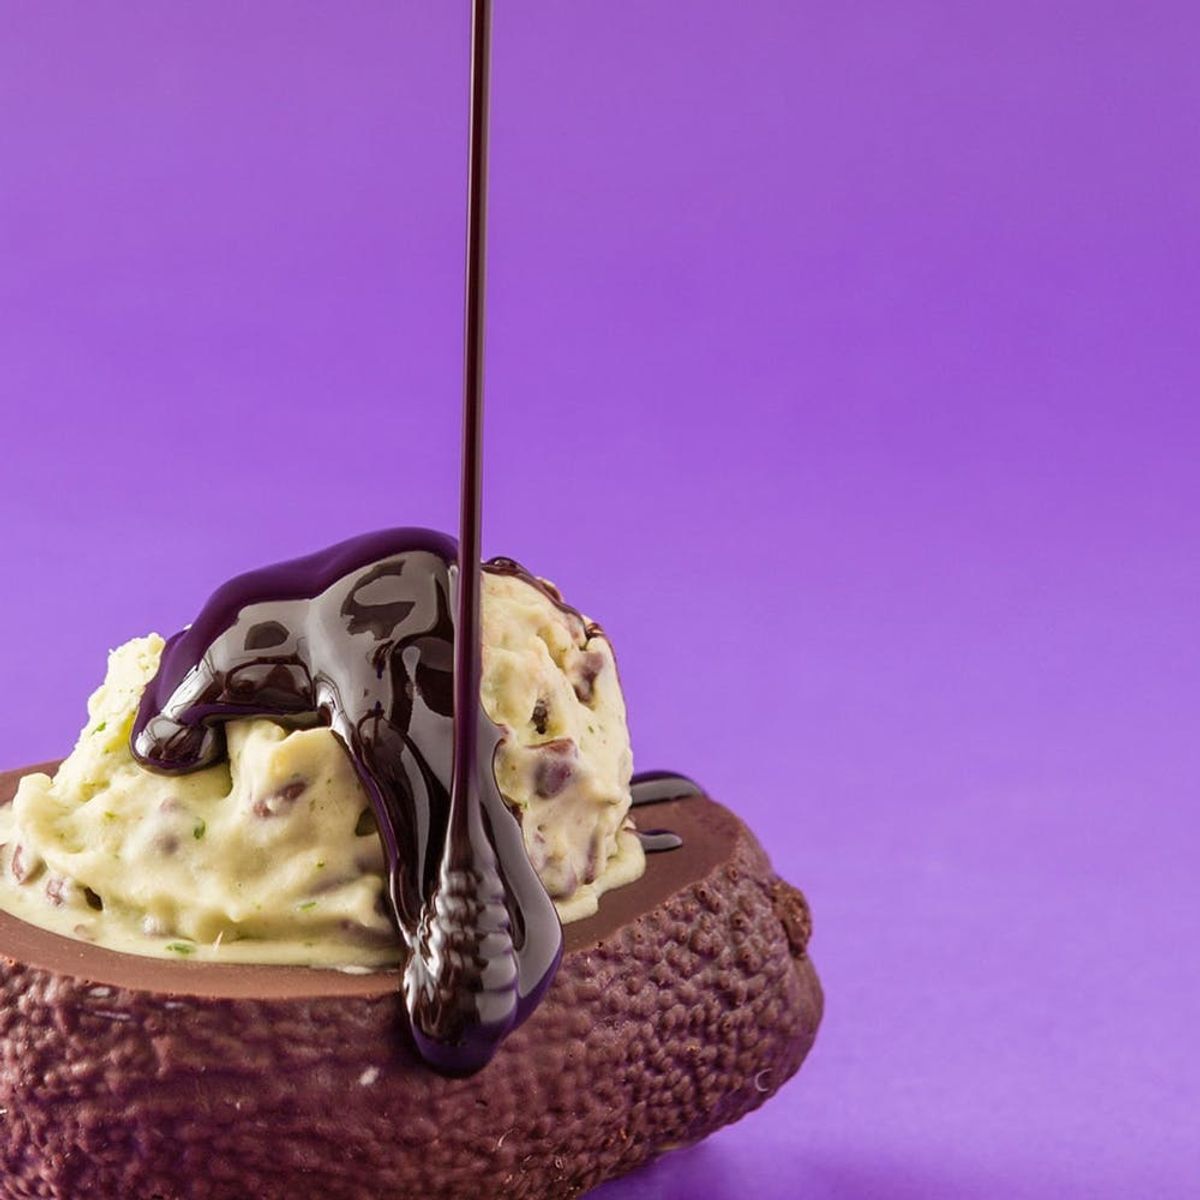 Your Guests Won’t Believe Their Eyes When They Gaze Upon This Chocolate Avocado Dessert Recipe